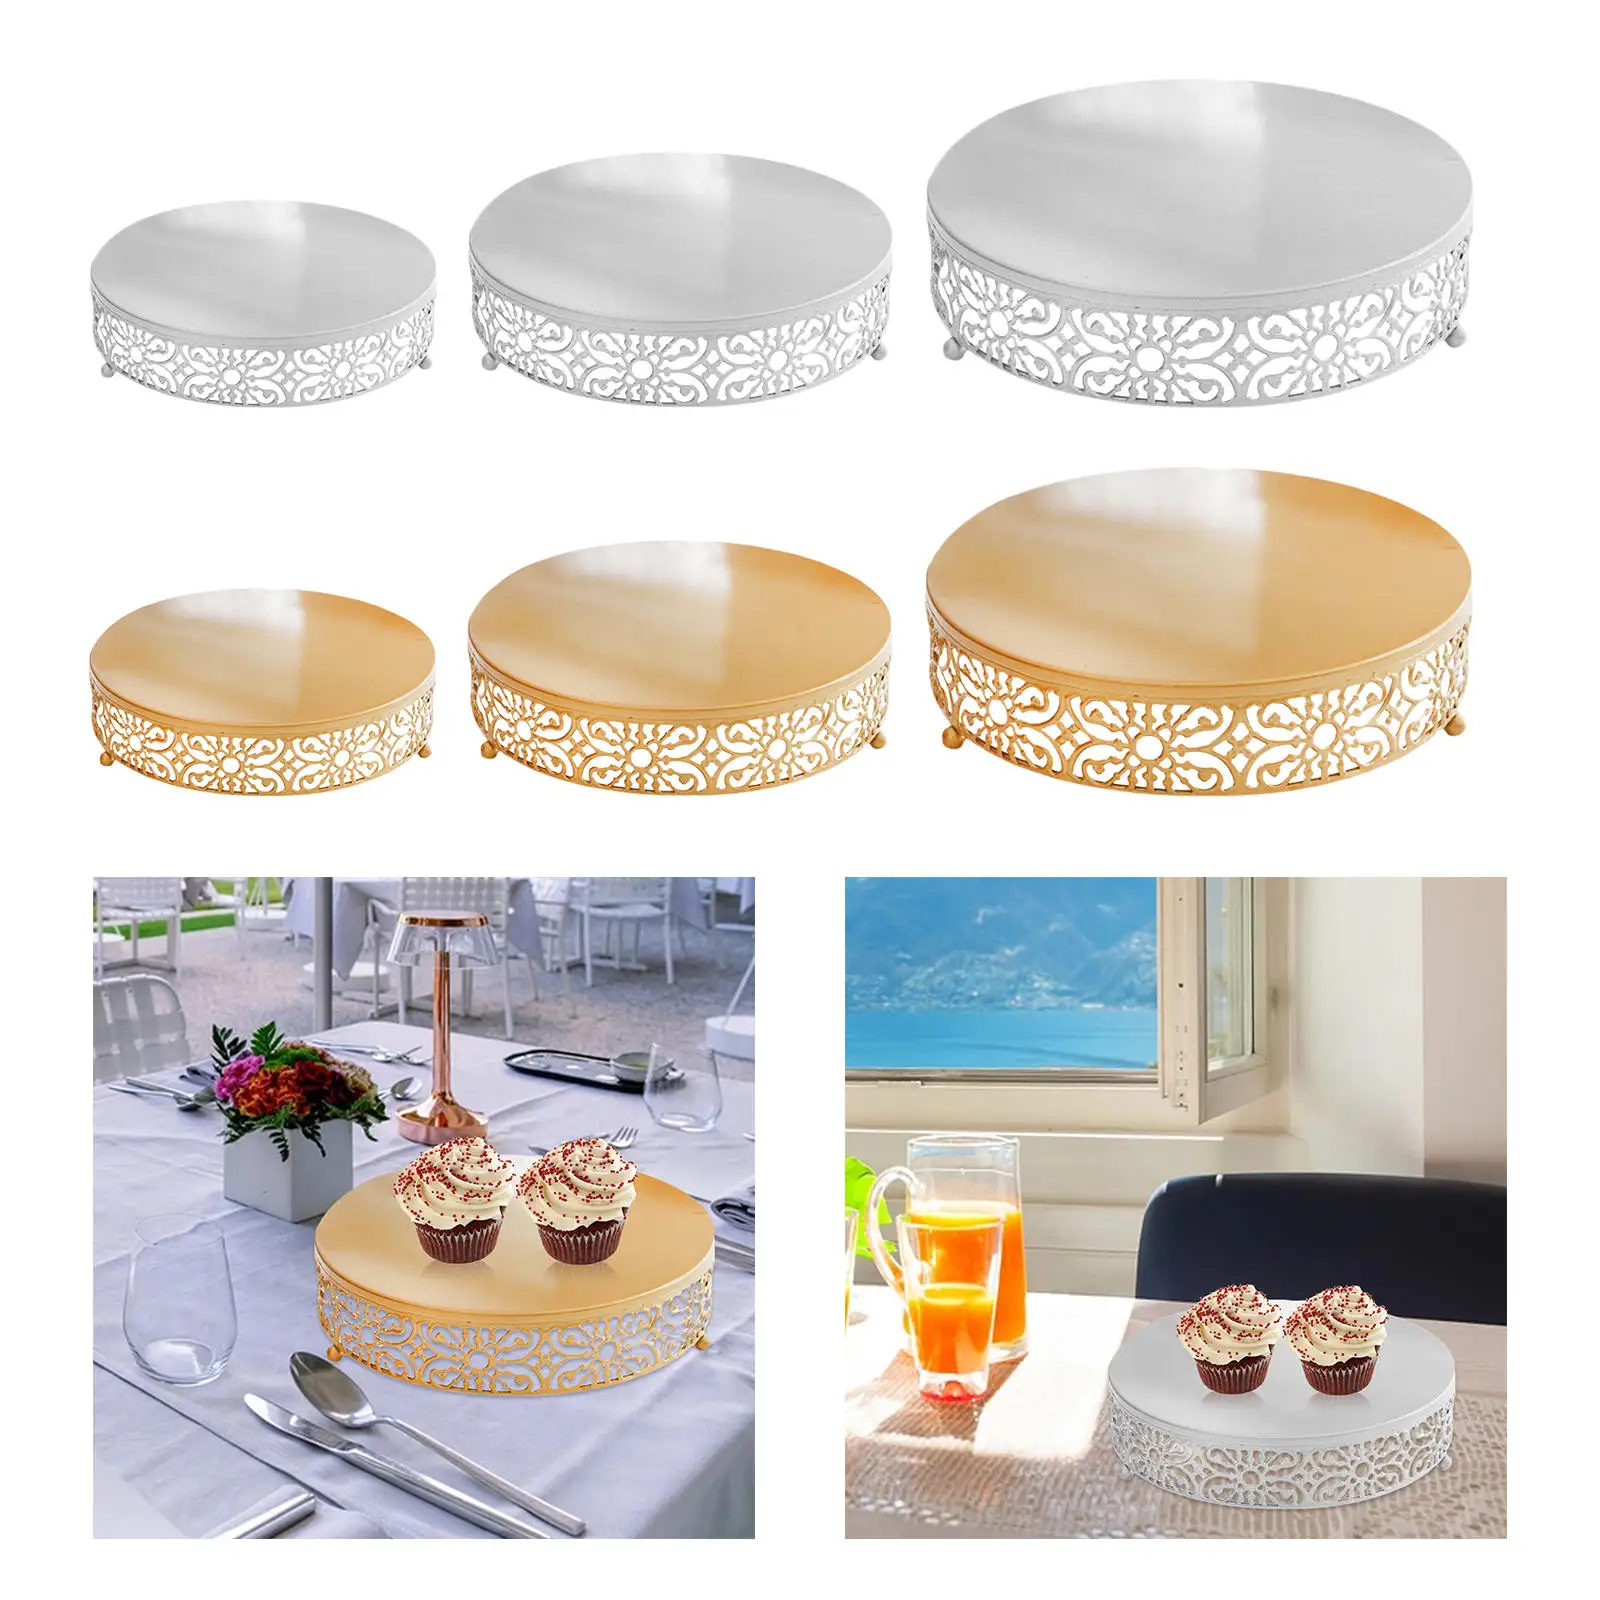 3/Set Luxury Round Cake Stands Dessert Display Plate Pastry Tart Pie Candy Cheese for Decor Event Centrepiece Birthday Home